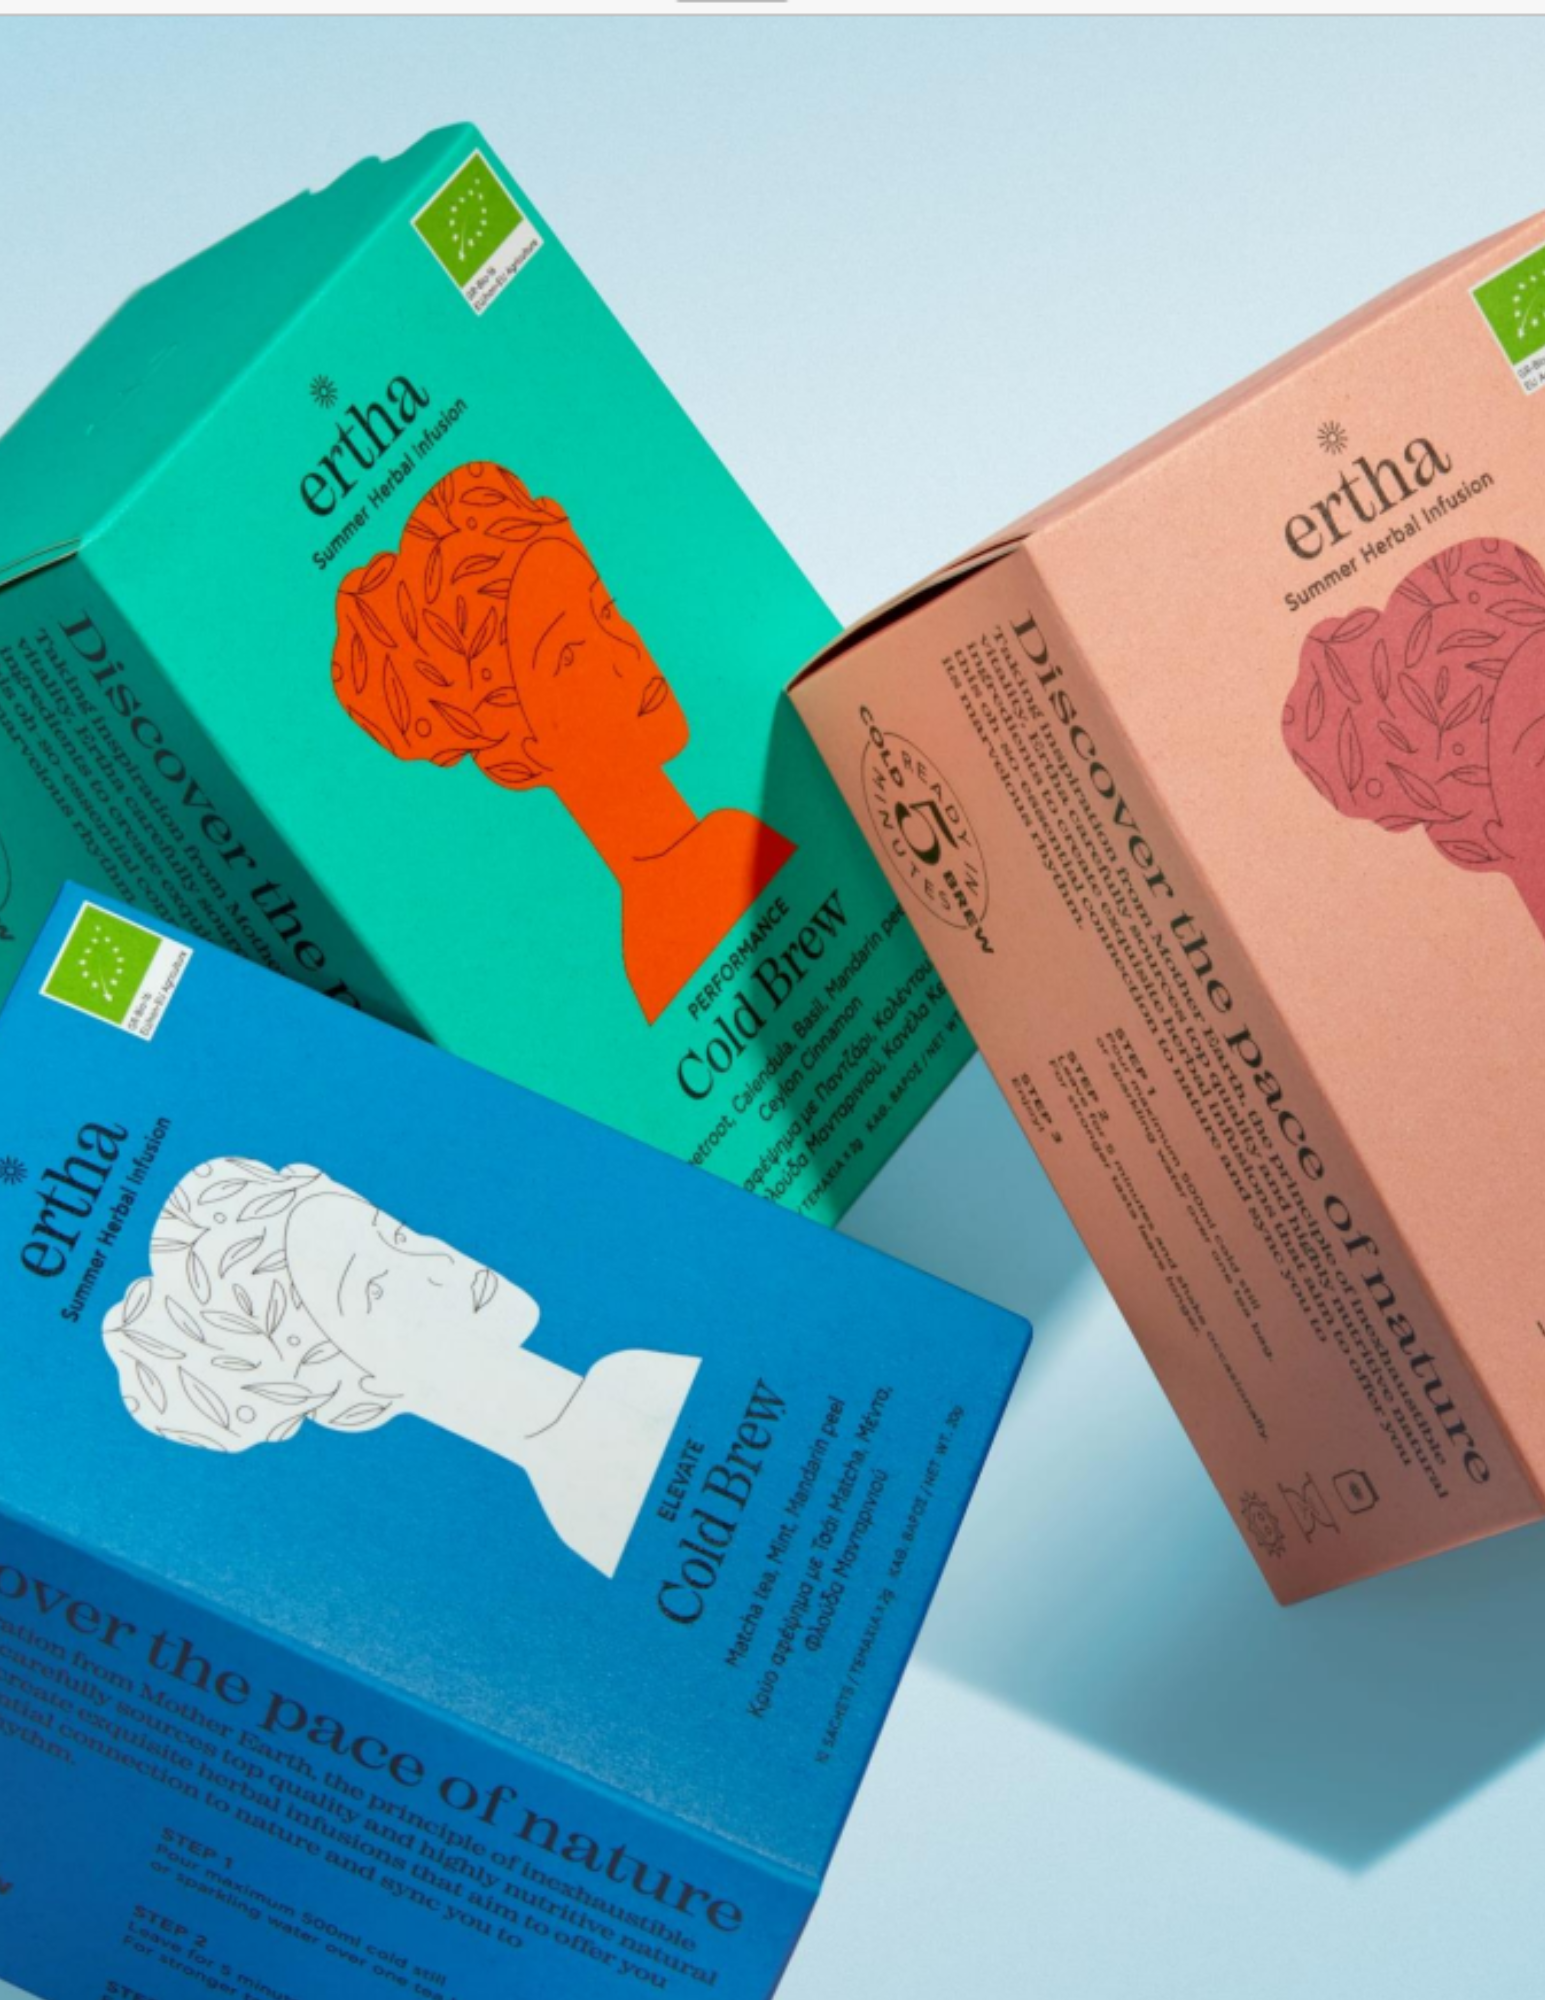 A collection of 3 different flavors of Ertha teas with 10 sachets each